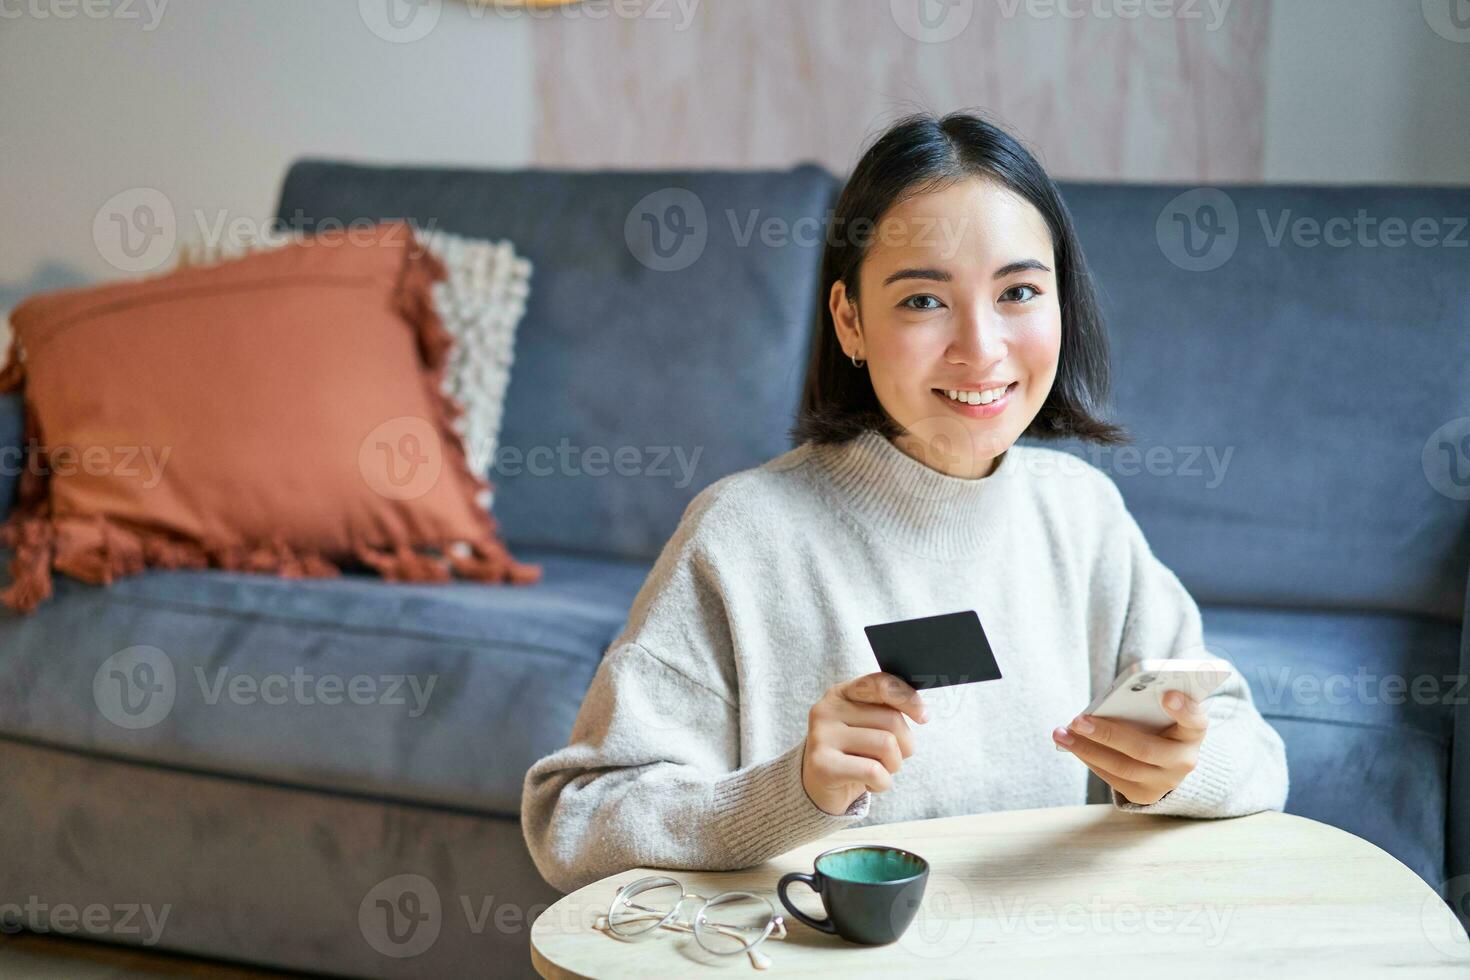 Smiling cute asian woman using credit card and smartphone, paying bills online, holding mobile phone, looking at camera photo